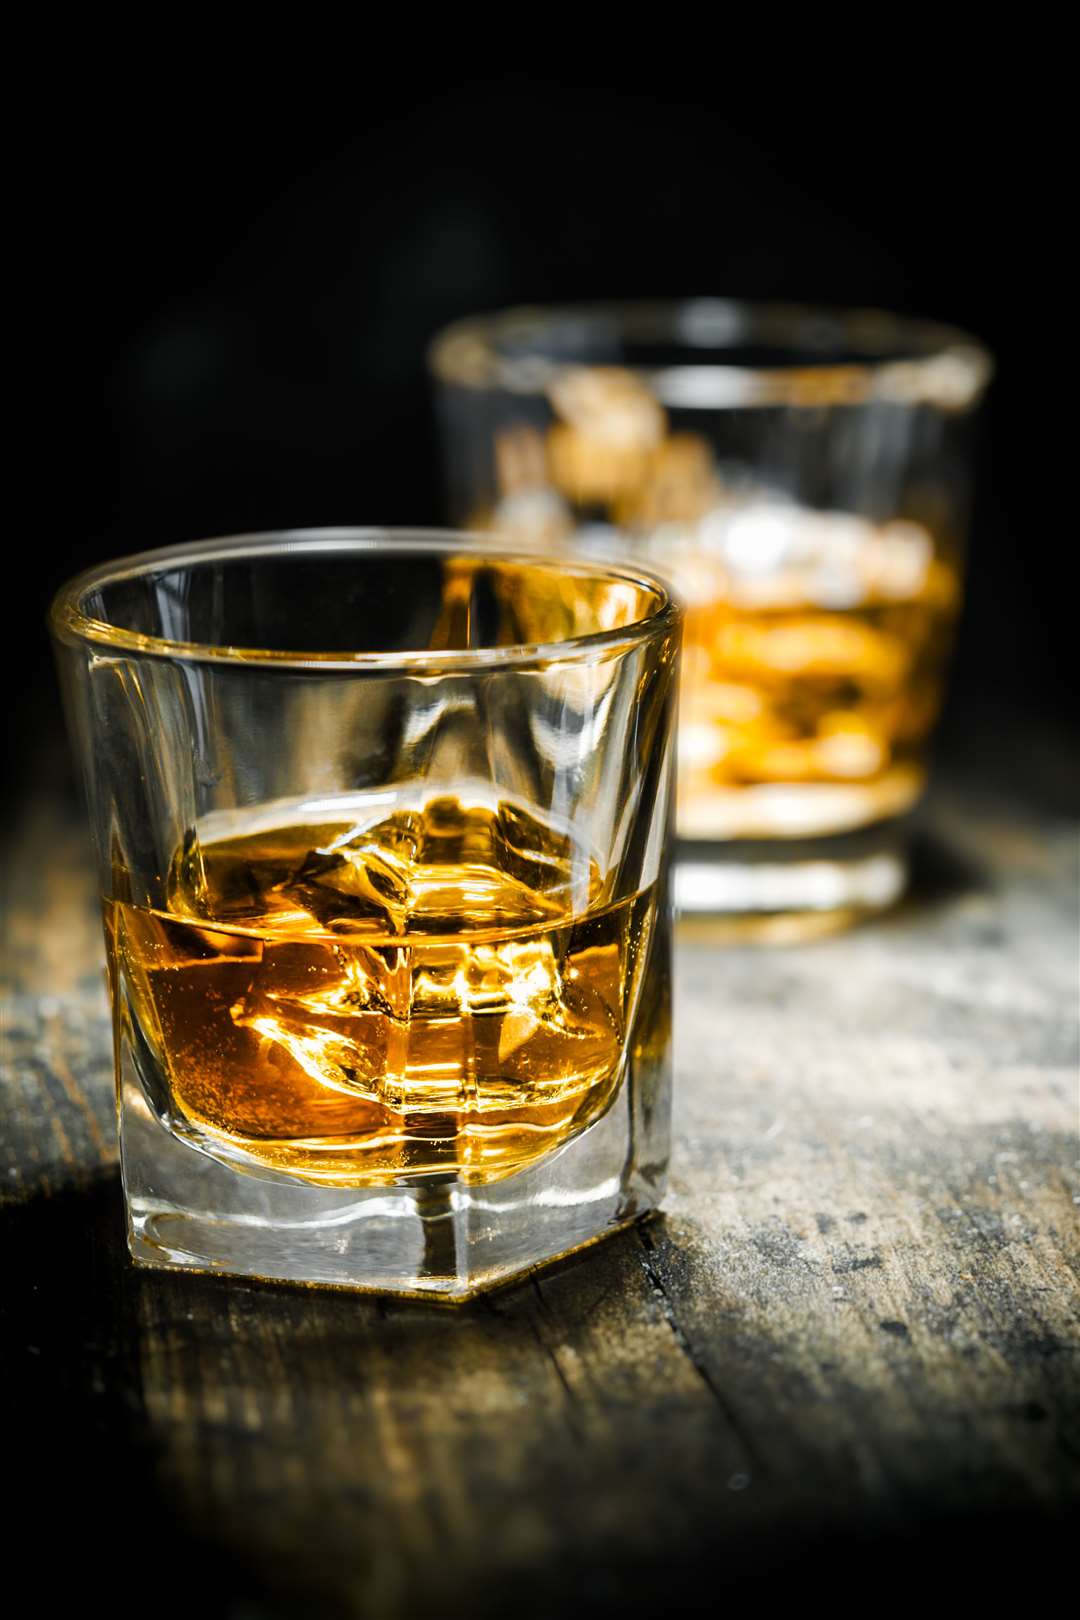 Whisky or whiskey... what's in a name?